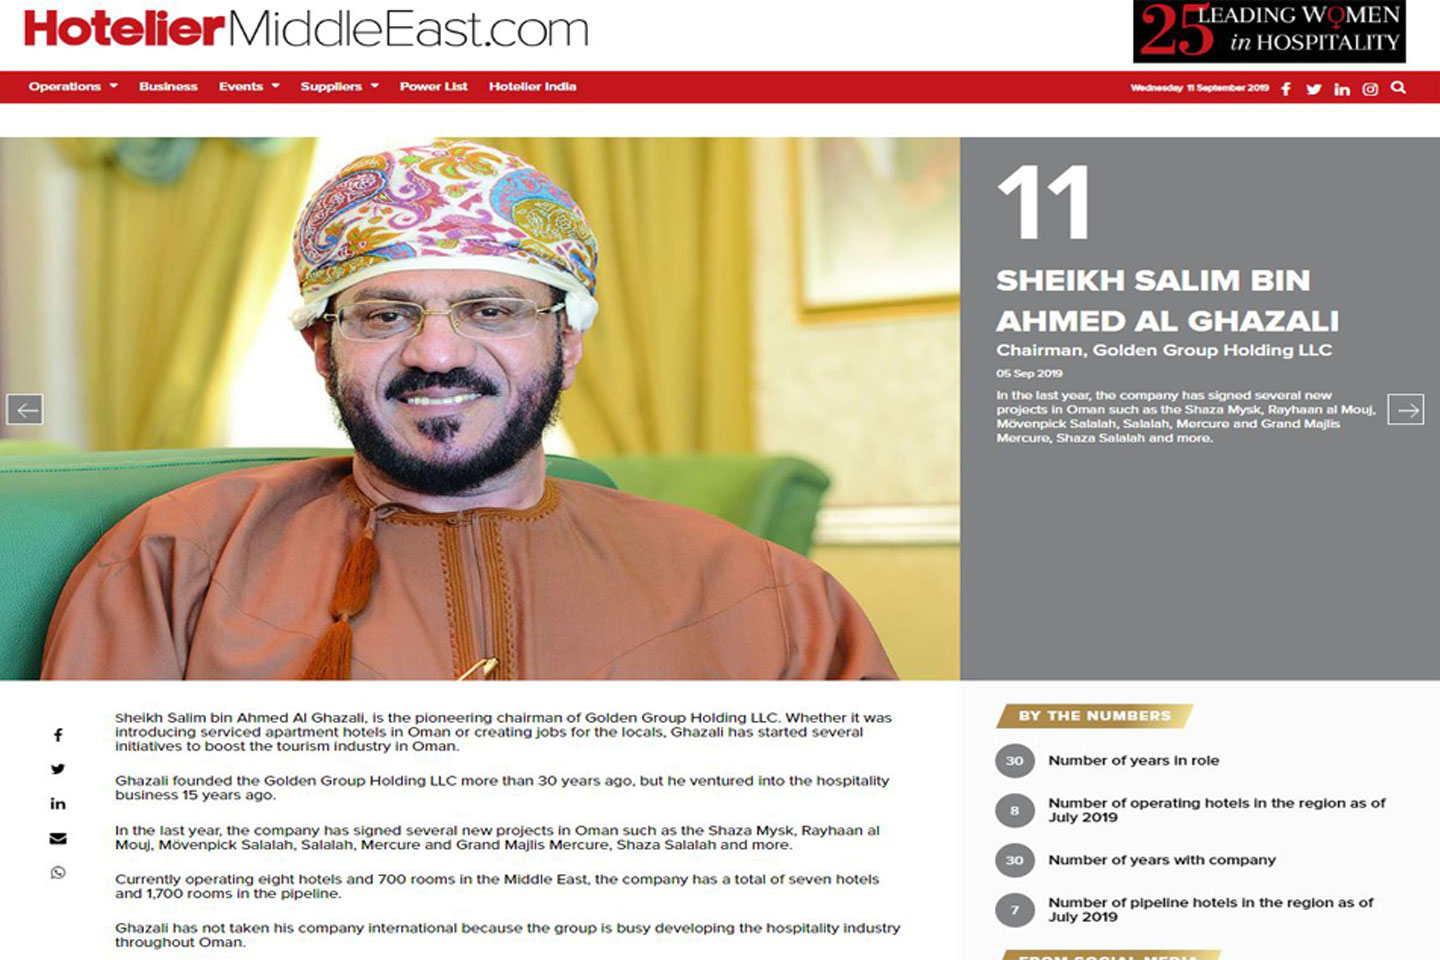 News by Hotelier Middle East